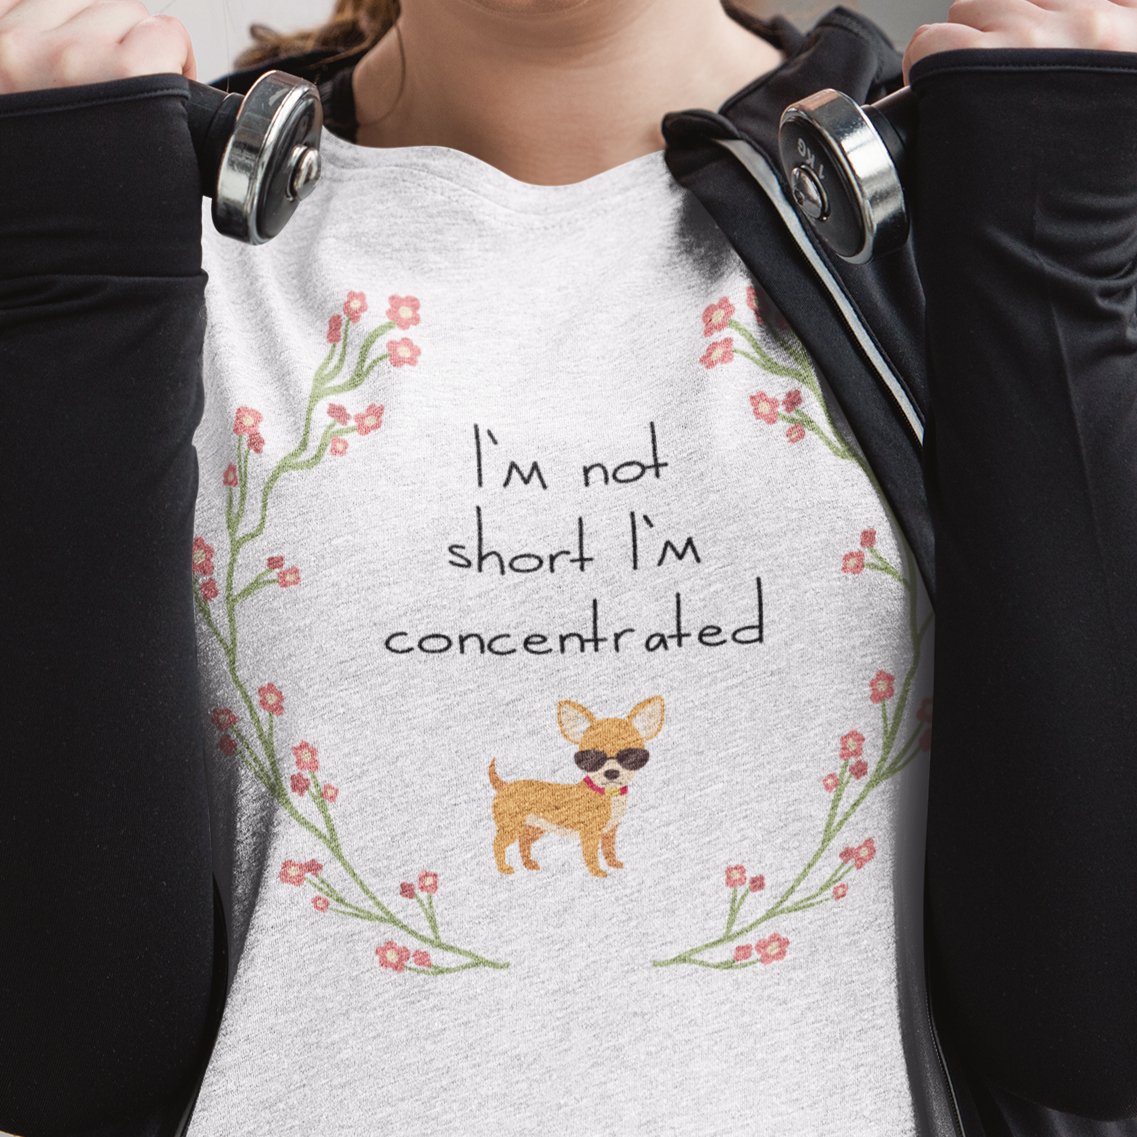 I'm Not Short, I'm Concentrated: Height-Positive Attitude T-shirt – Where Confidence Stands Tall in a Compact Frame!